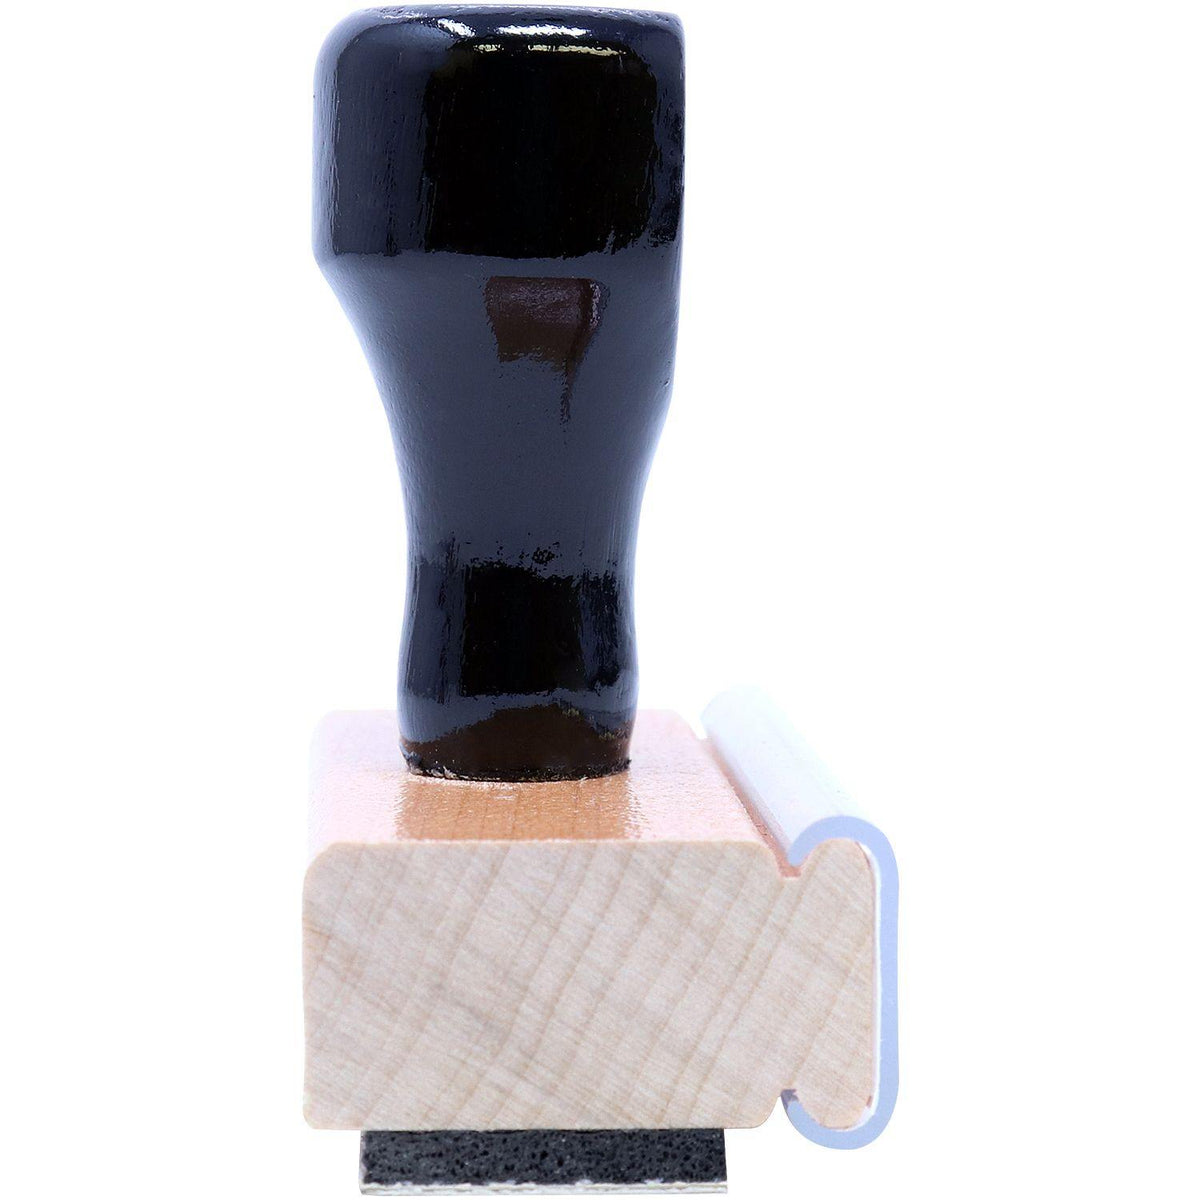 Side View of Large Debtor Exhibit Rubber Stamp